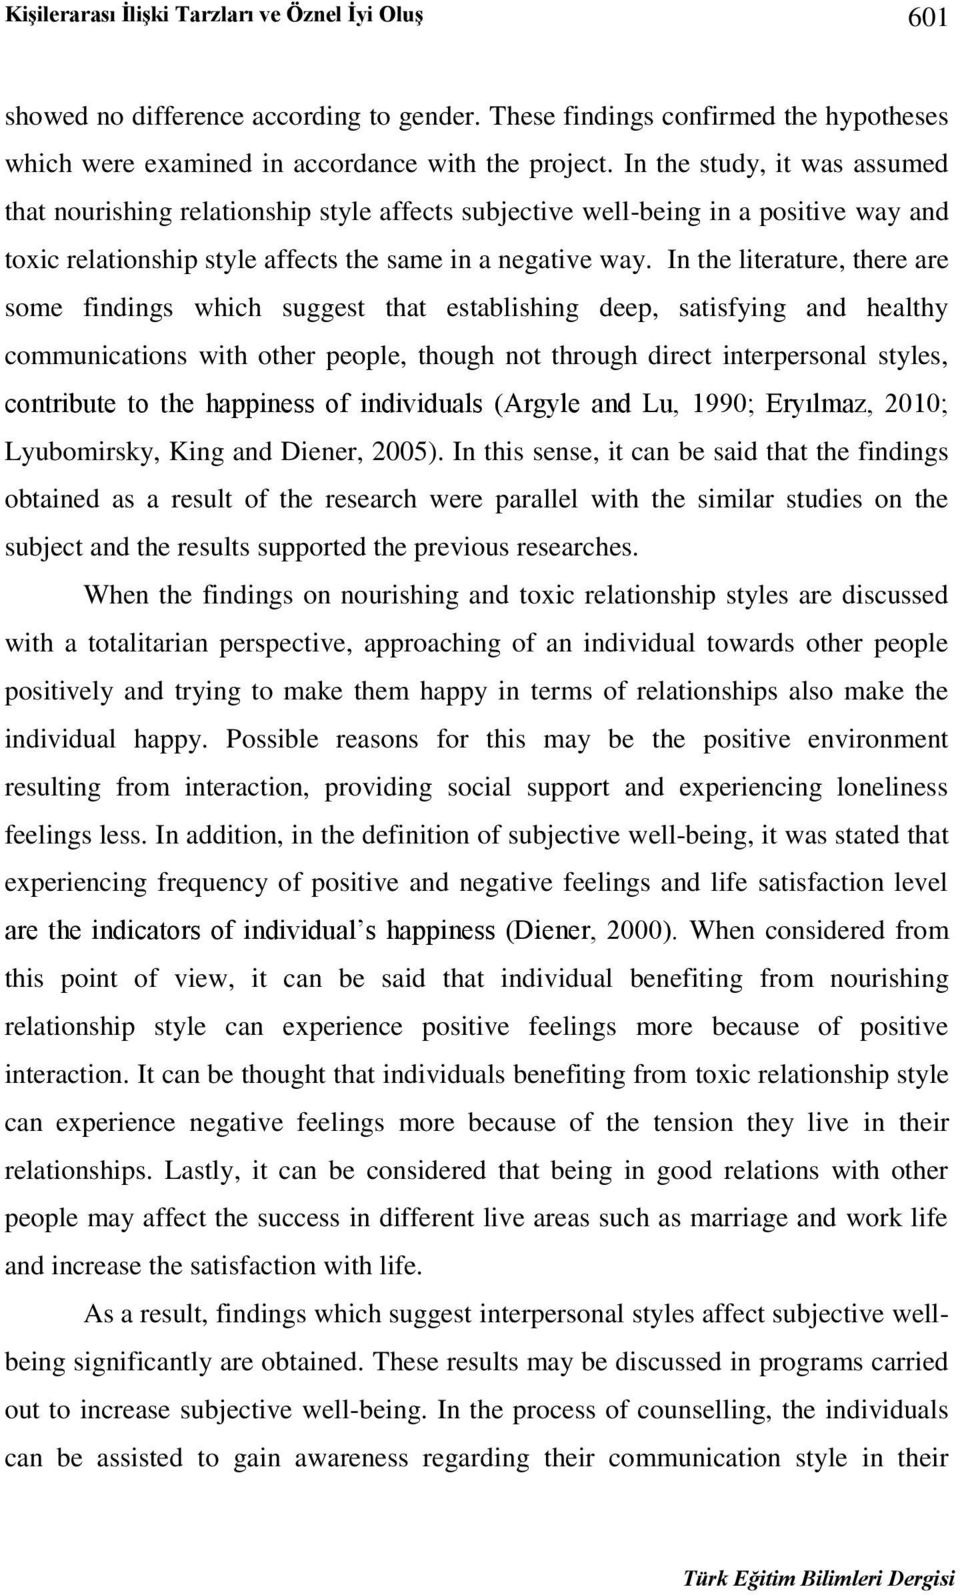 In the literature, there are some findings which suggest that establishing deep, satisfying and healthy communications with other people, though not through direct interpersonal styles, contribute to